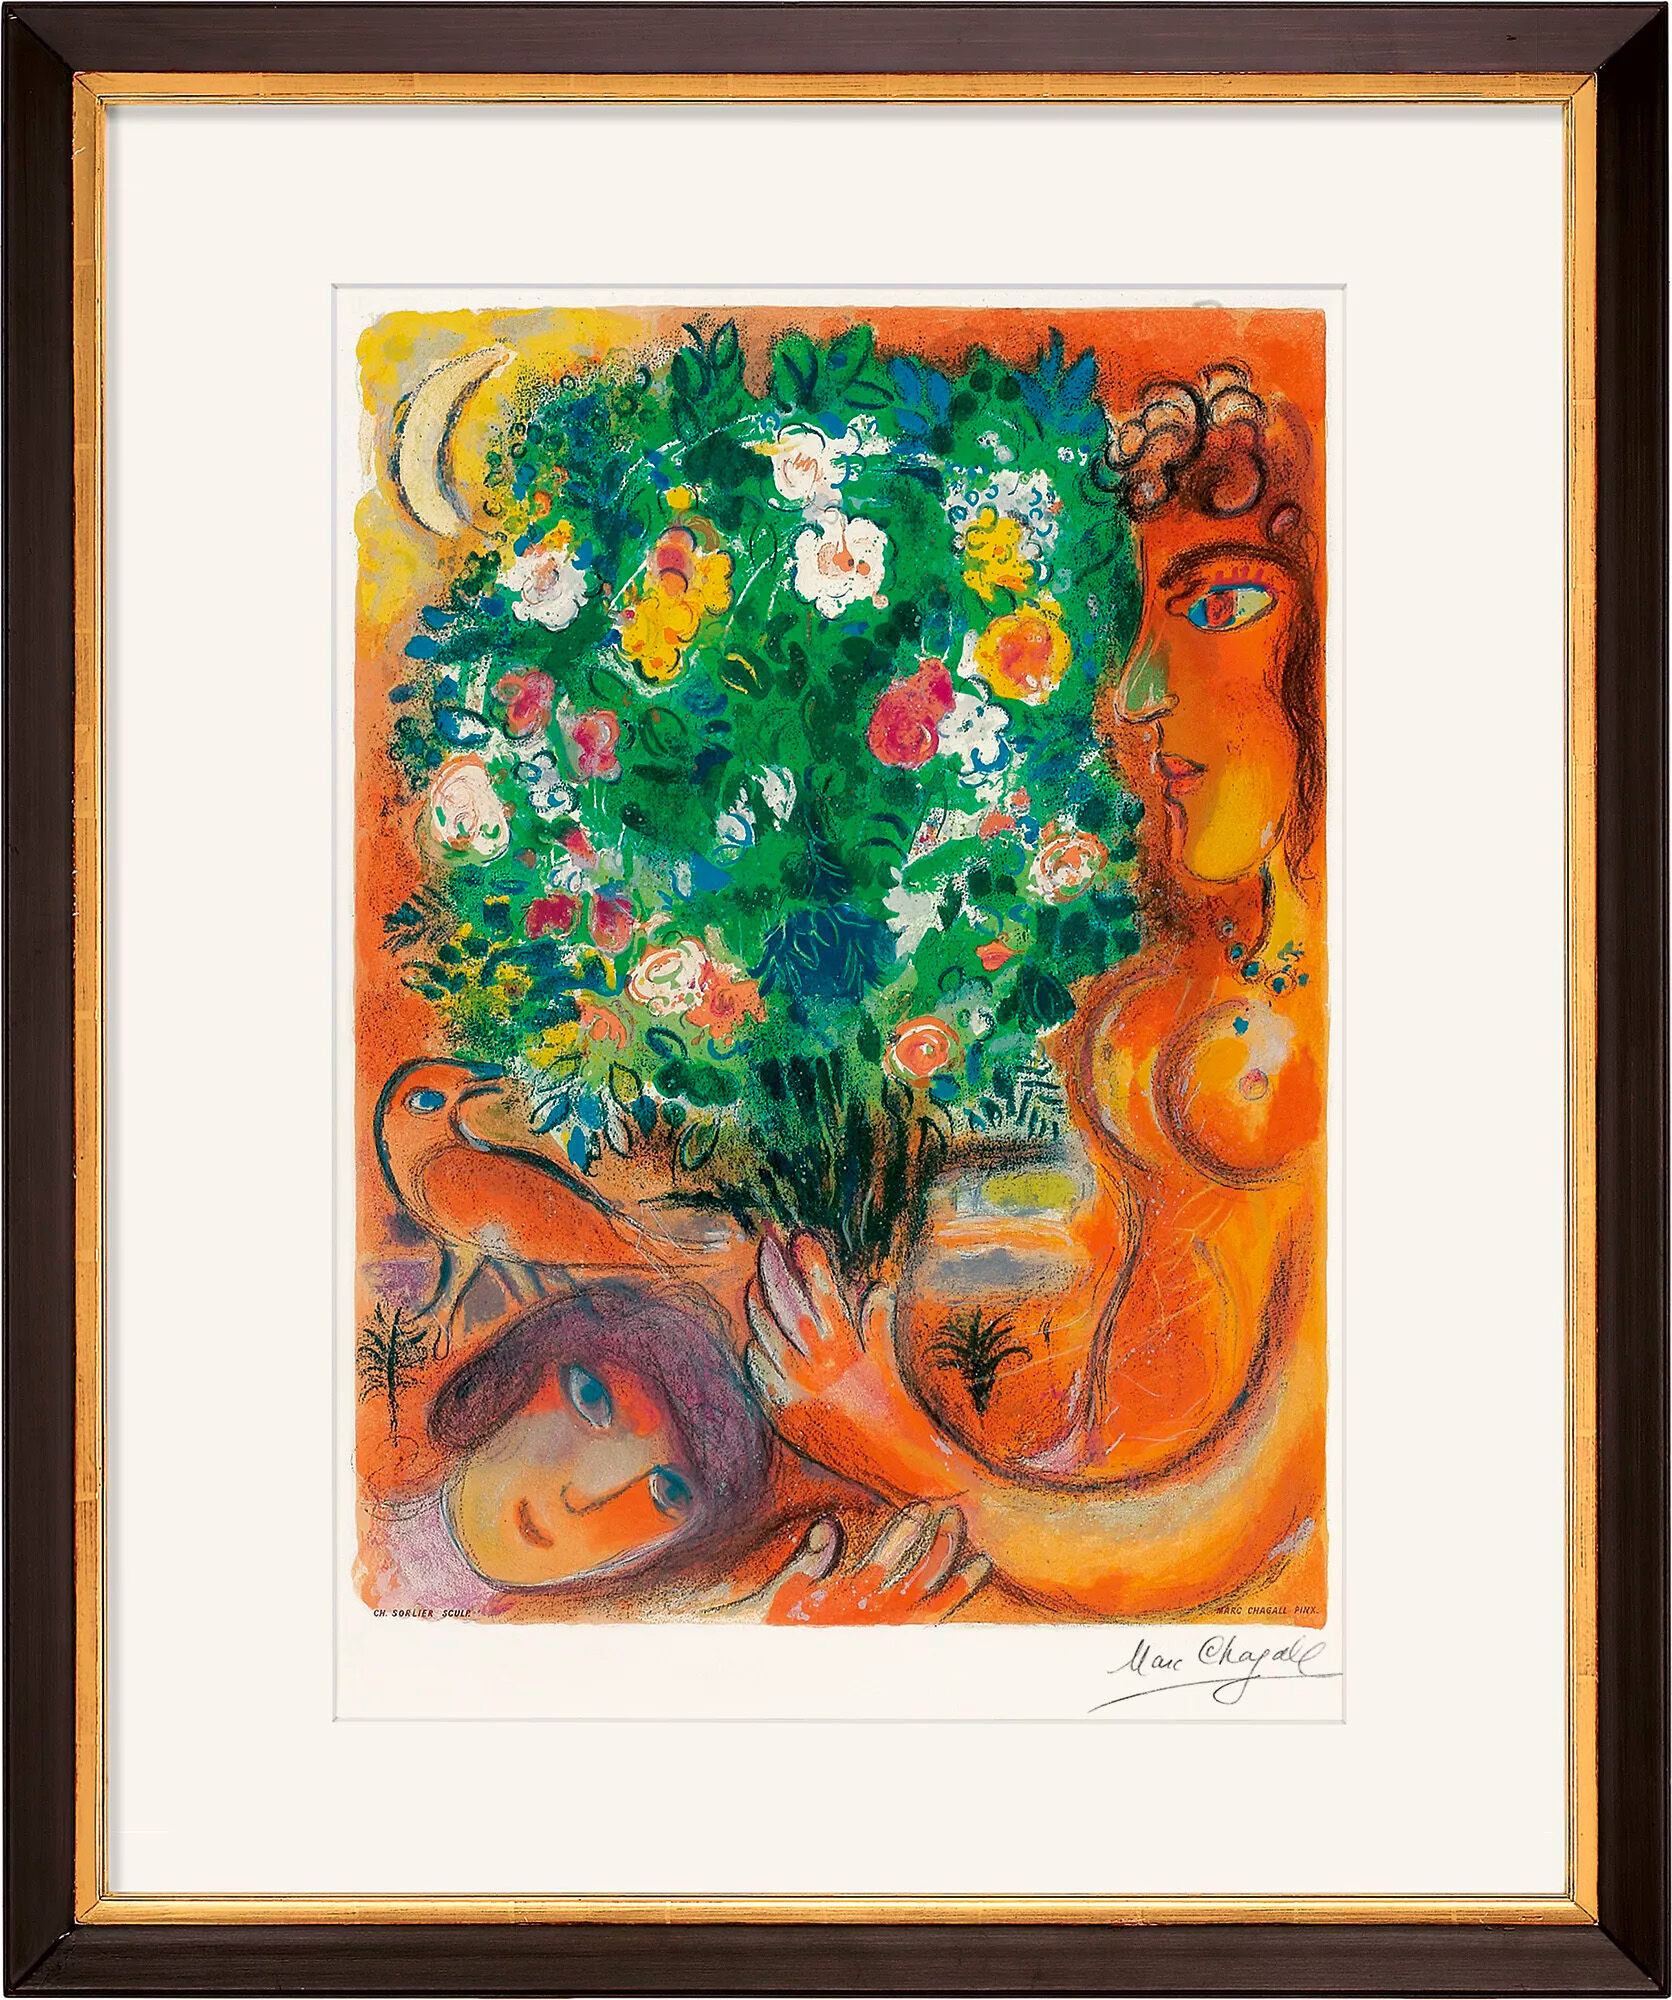 Picture "Woman with a Bouquet of Flowers" (1967) by Marc Chagall